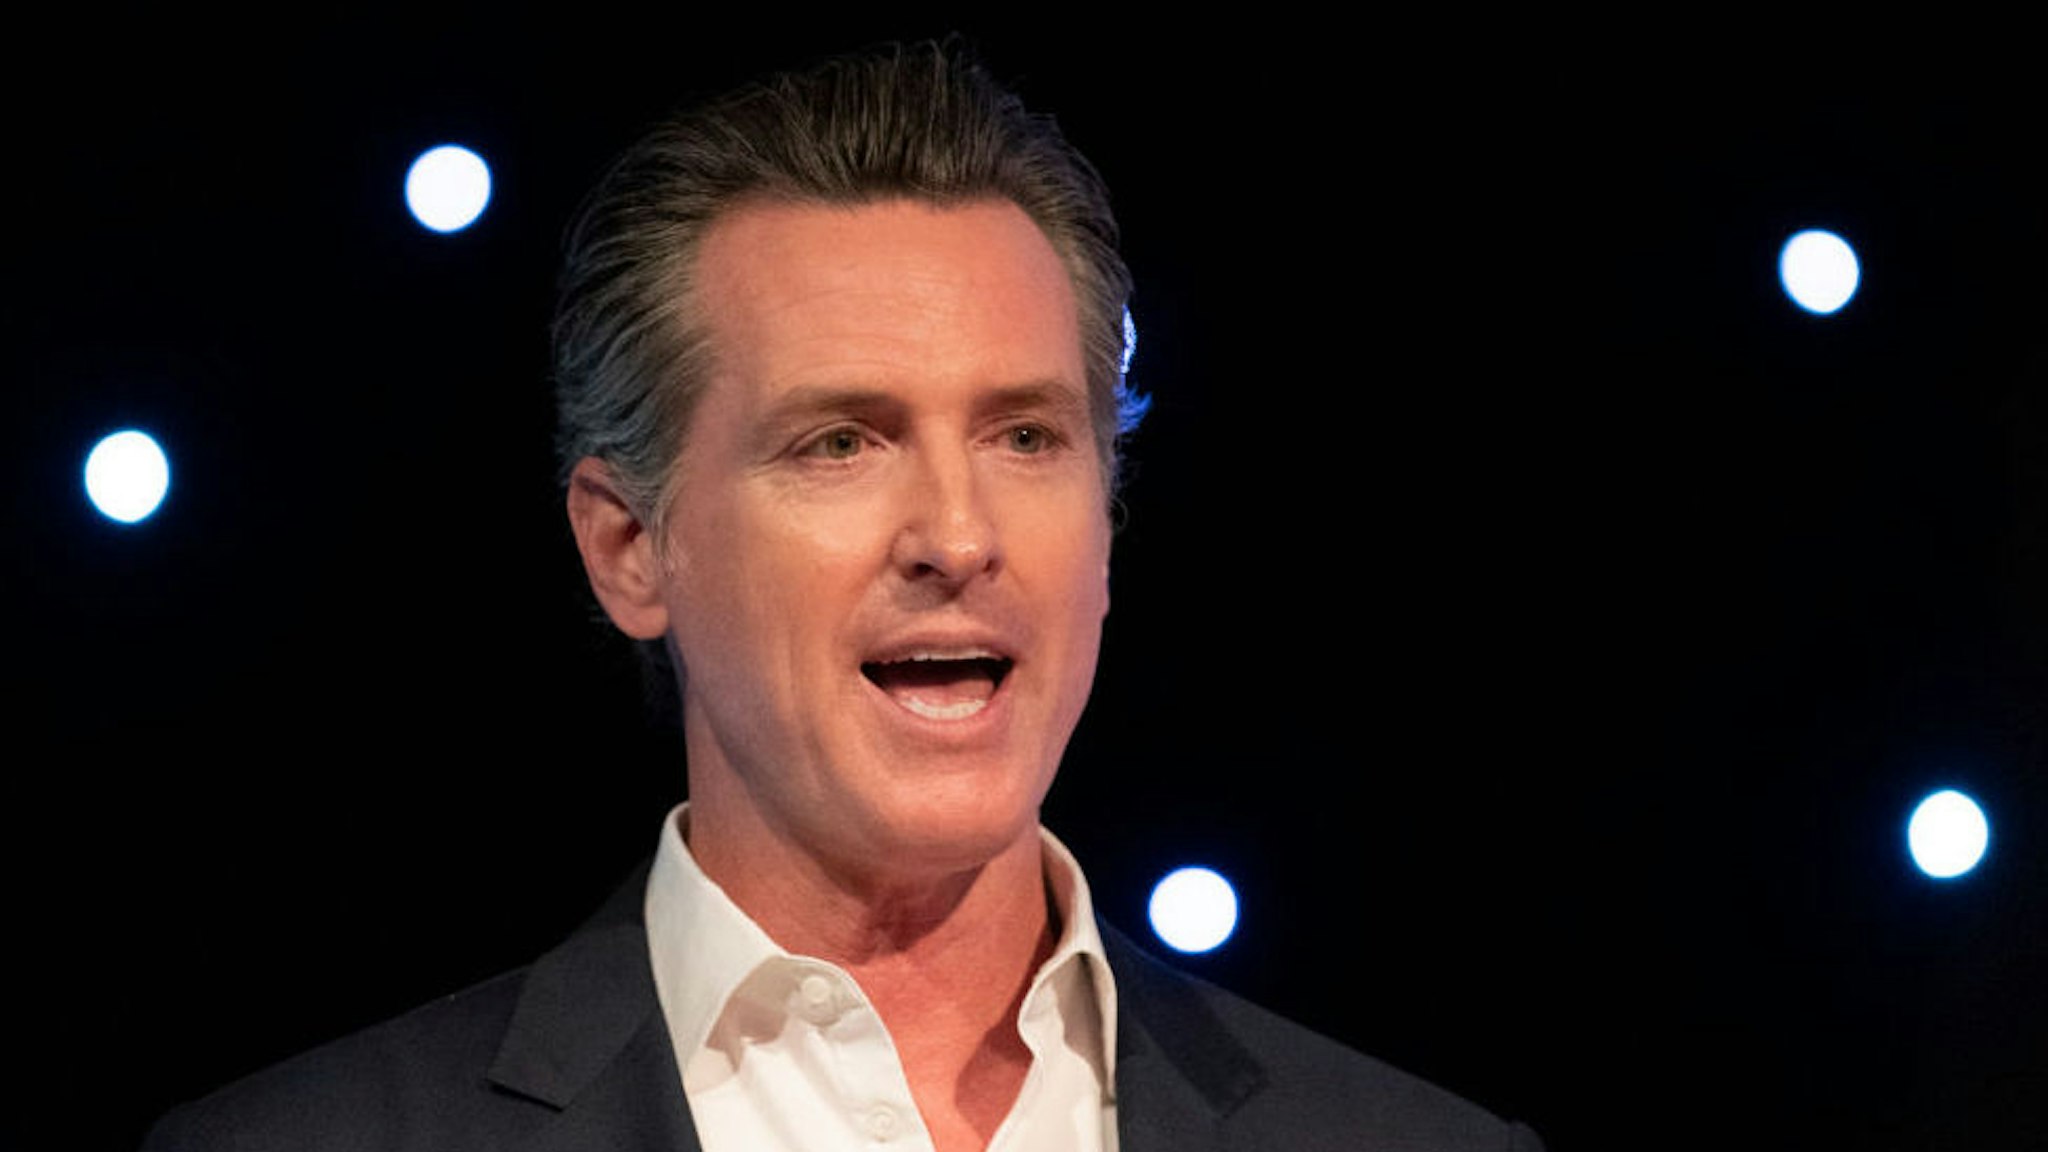 California Governor Gavin Newsom speaks at Planet’s Explore 19 Conference in San Francisco, California on October 15, 2019. The Governor talks about the importance of protecting our environment and enhance the states capability at dealing with natural disasters such as wild fire. (Photo by Yichuan Cao/NurPhoto)